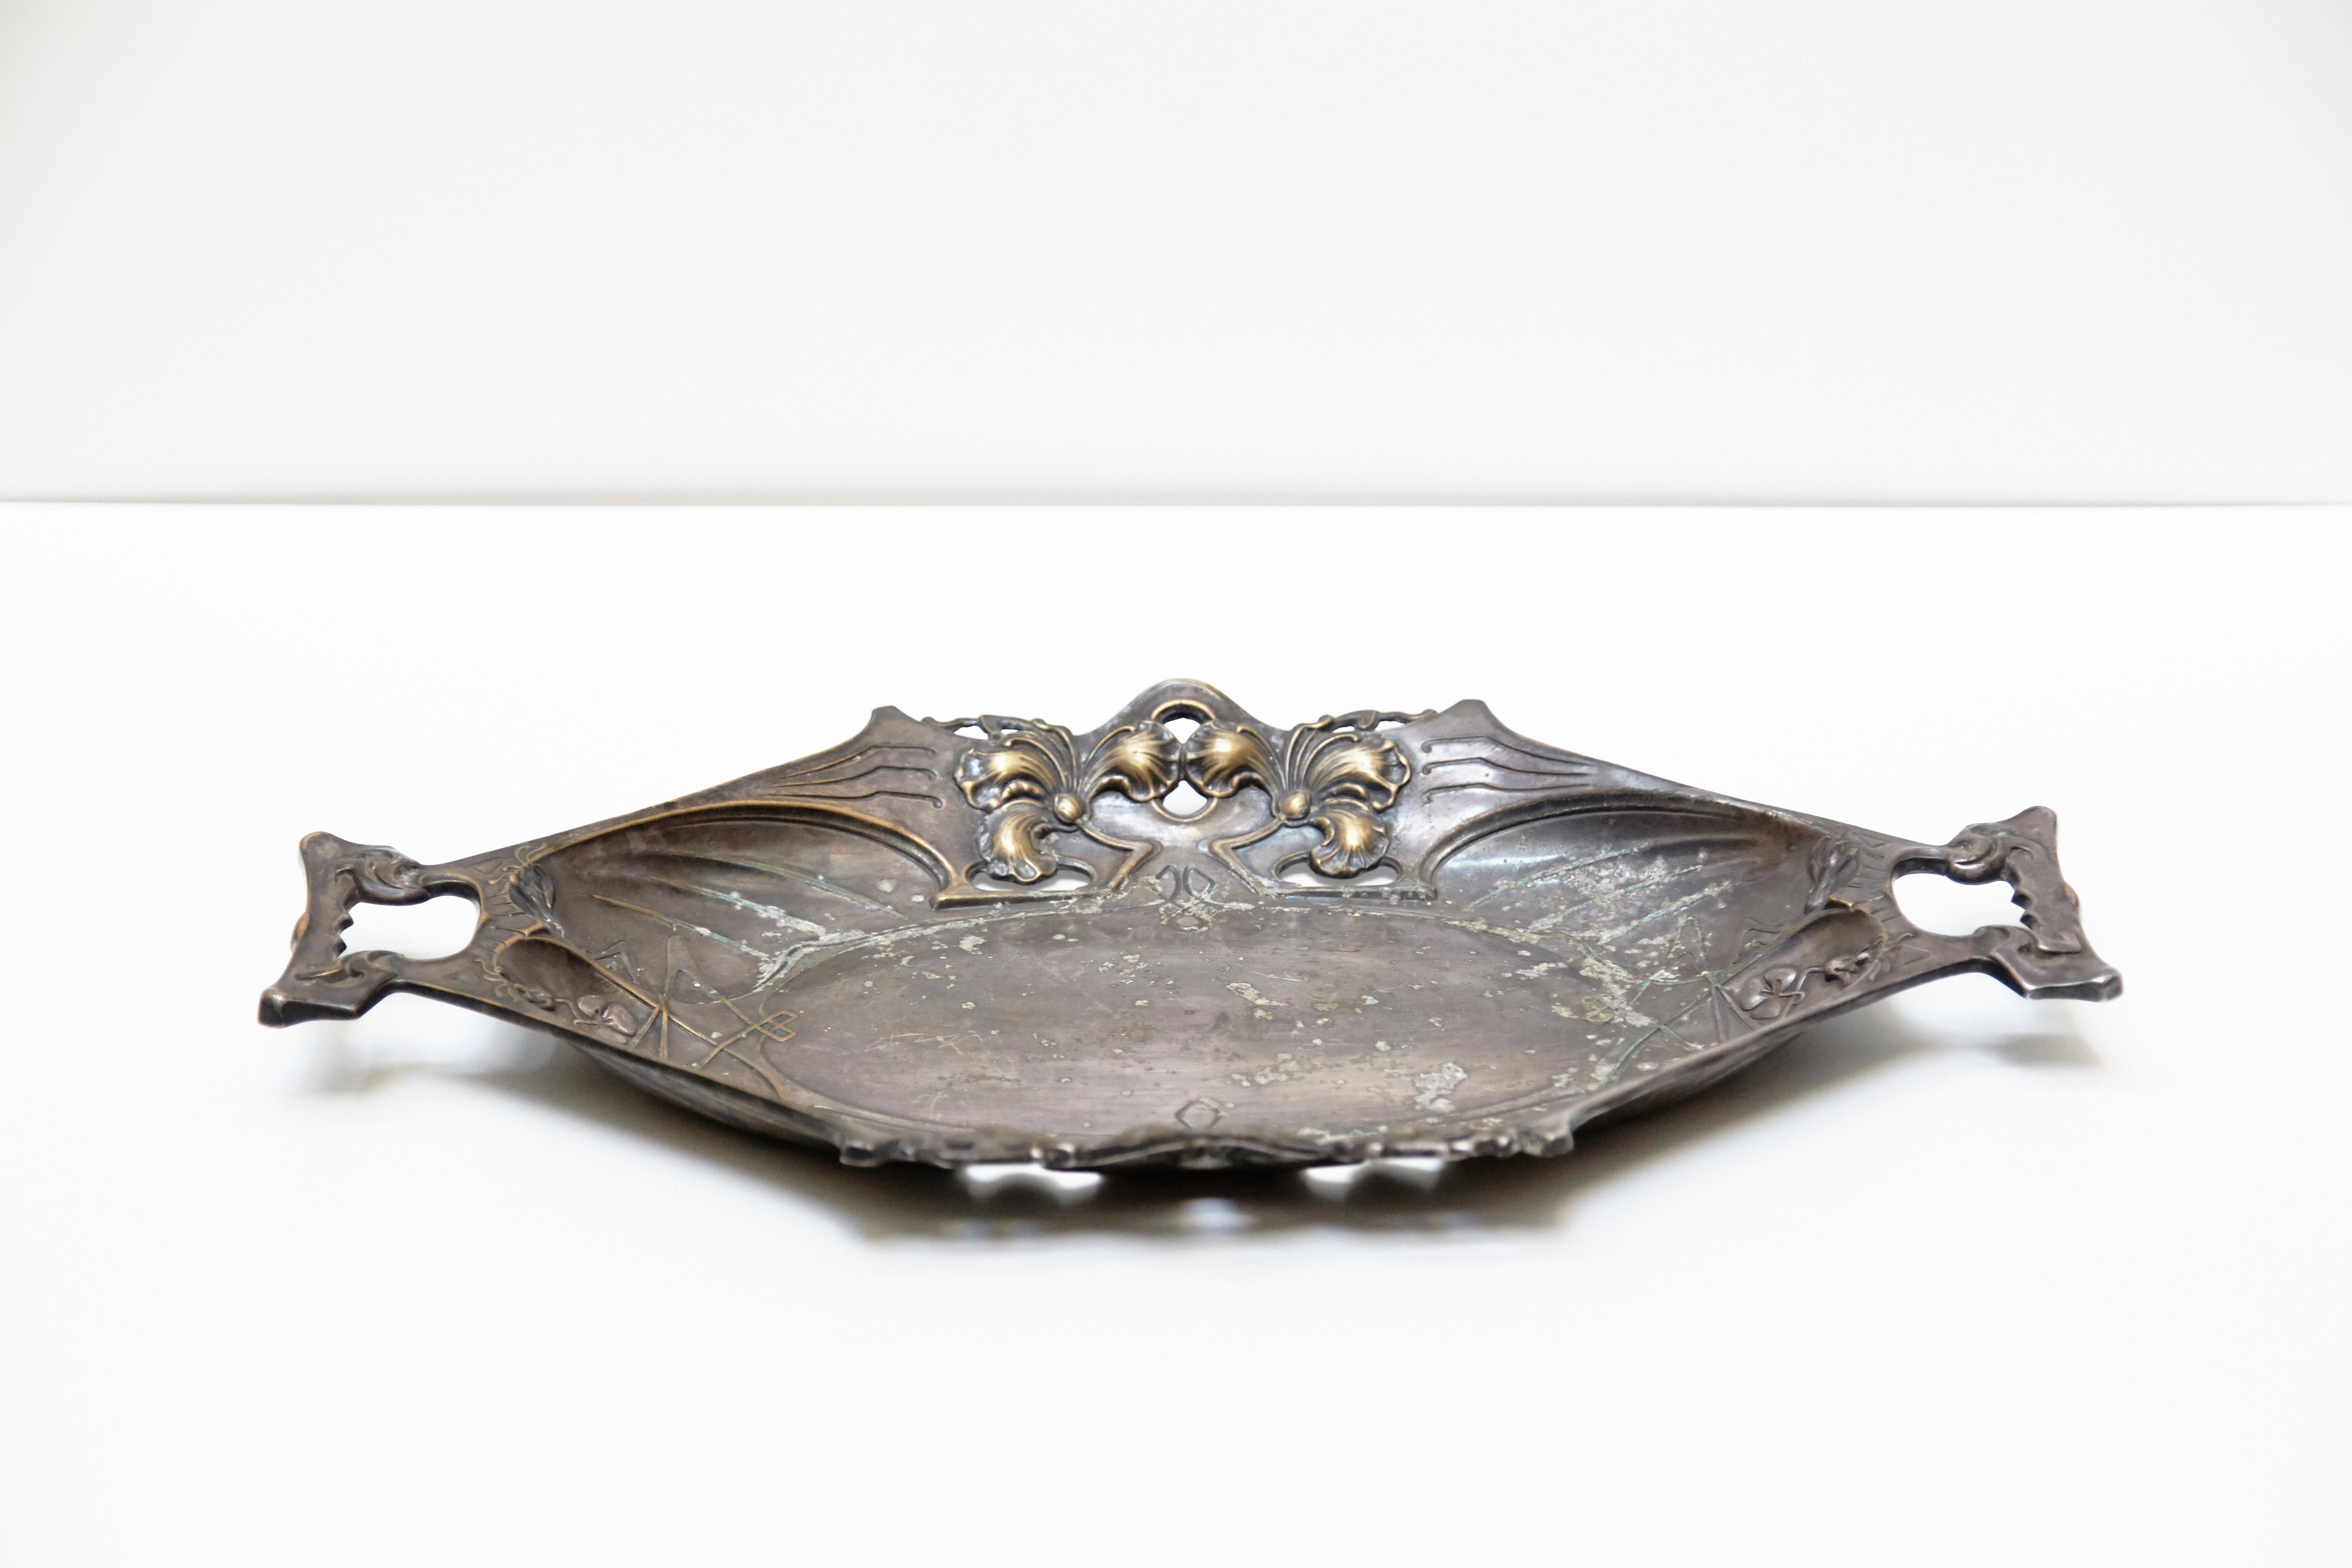 Catalan modernist pewter tray from Barcelona, circa 1920

Catalan modernist pewter tray.
Manufactured in Barcelona, circa 1920.

In original condition with minor wear consistent of age and use, preserving a beautiful patina.

Measures: 4 H x